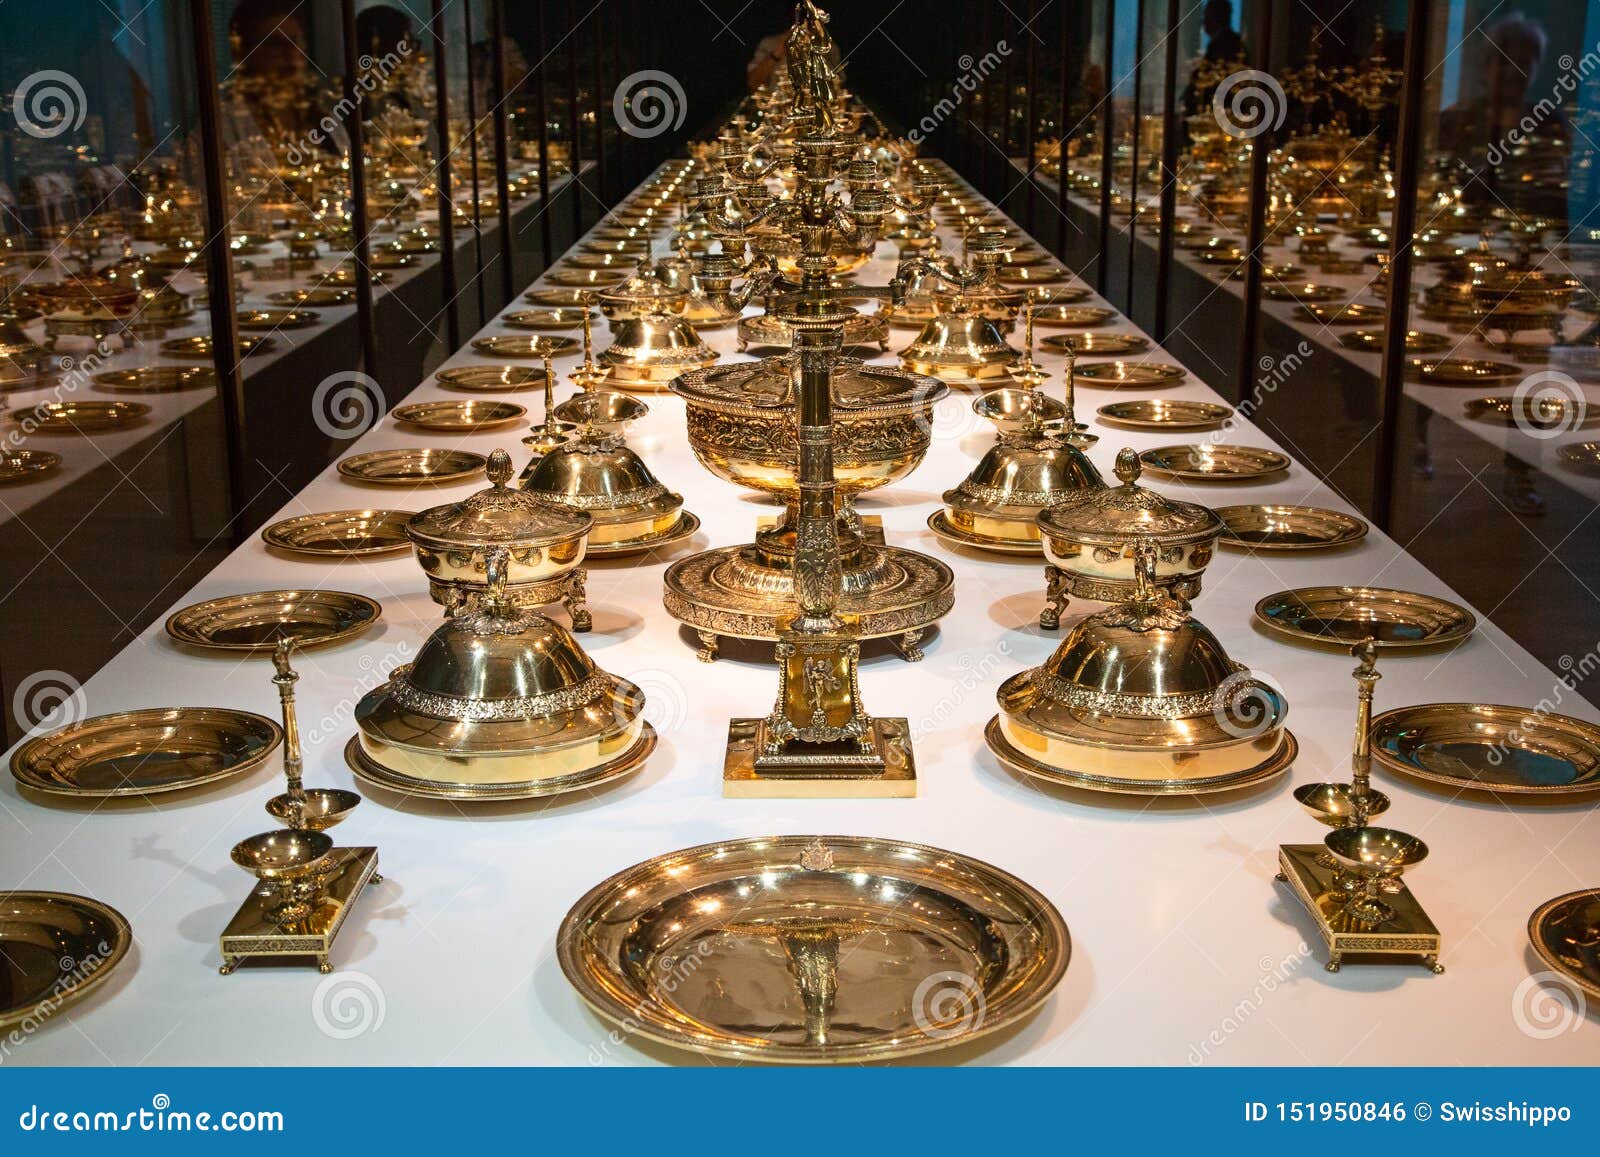 Medieval Golden Kitchenware Stock Photo   Image of aged, golden ...